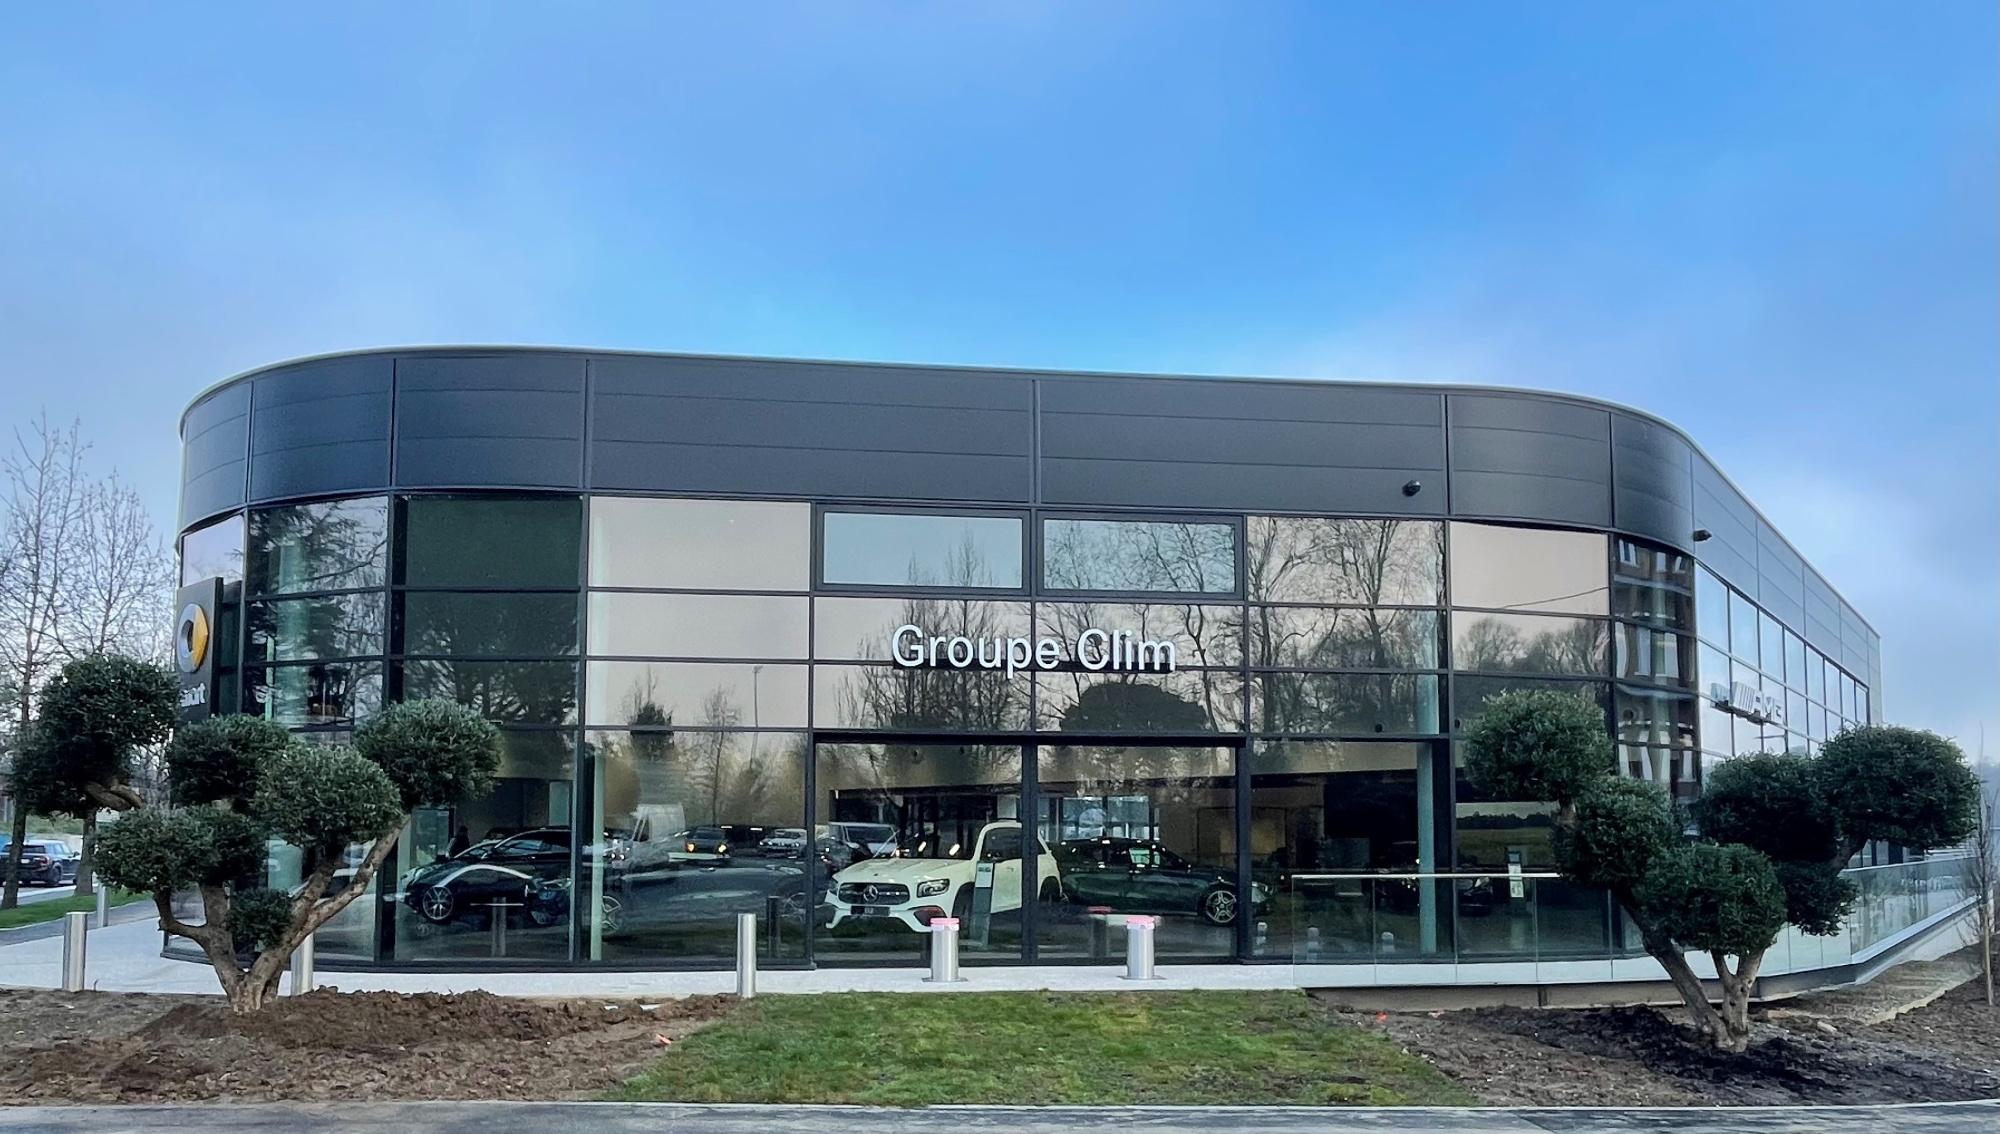 Mercedes-benz - Groupe Clim - Anglet Anglet